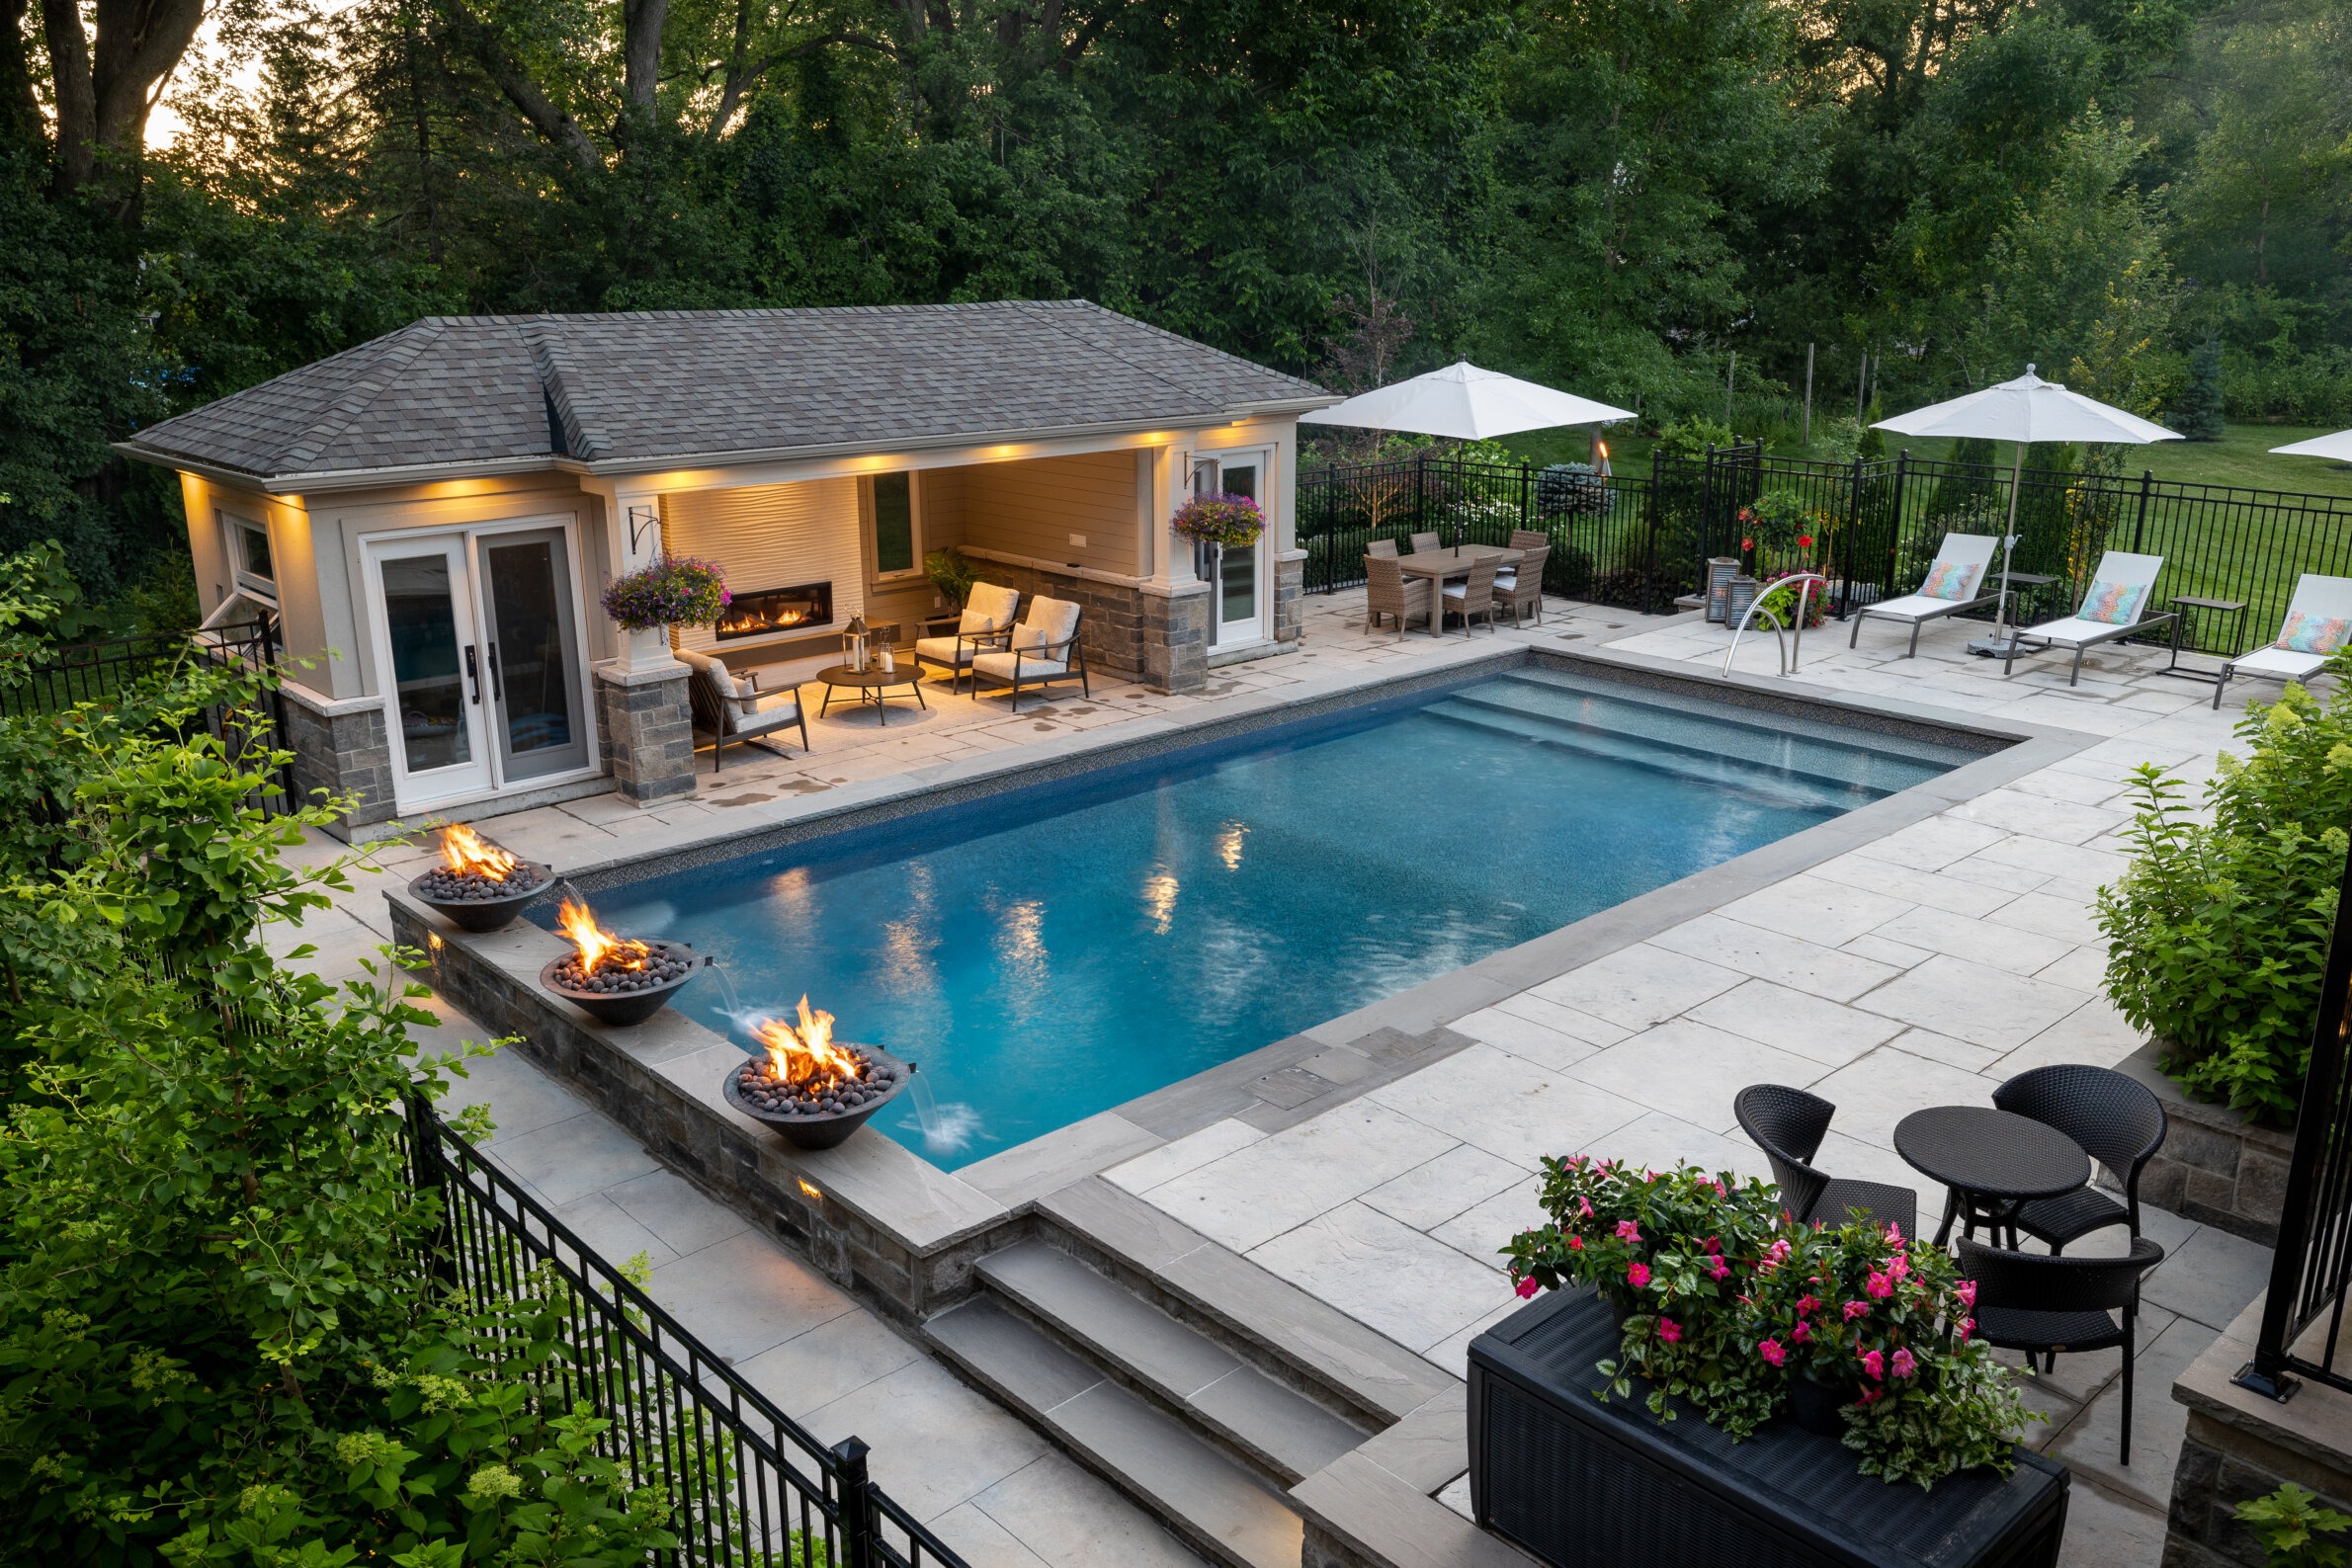 An elegantly designed backyard with a pool, fire bowls, lounging chairs, and an outdoor seating area with a fireplace. Greenery and dusk sky add ambiance.